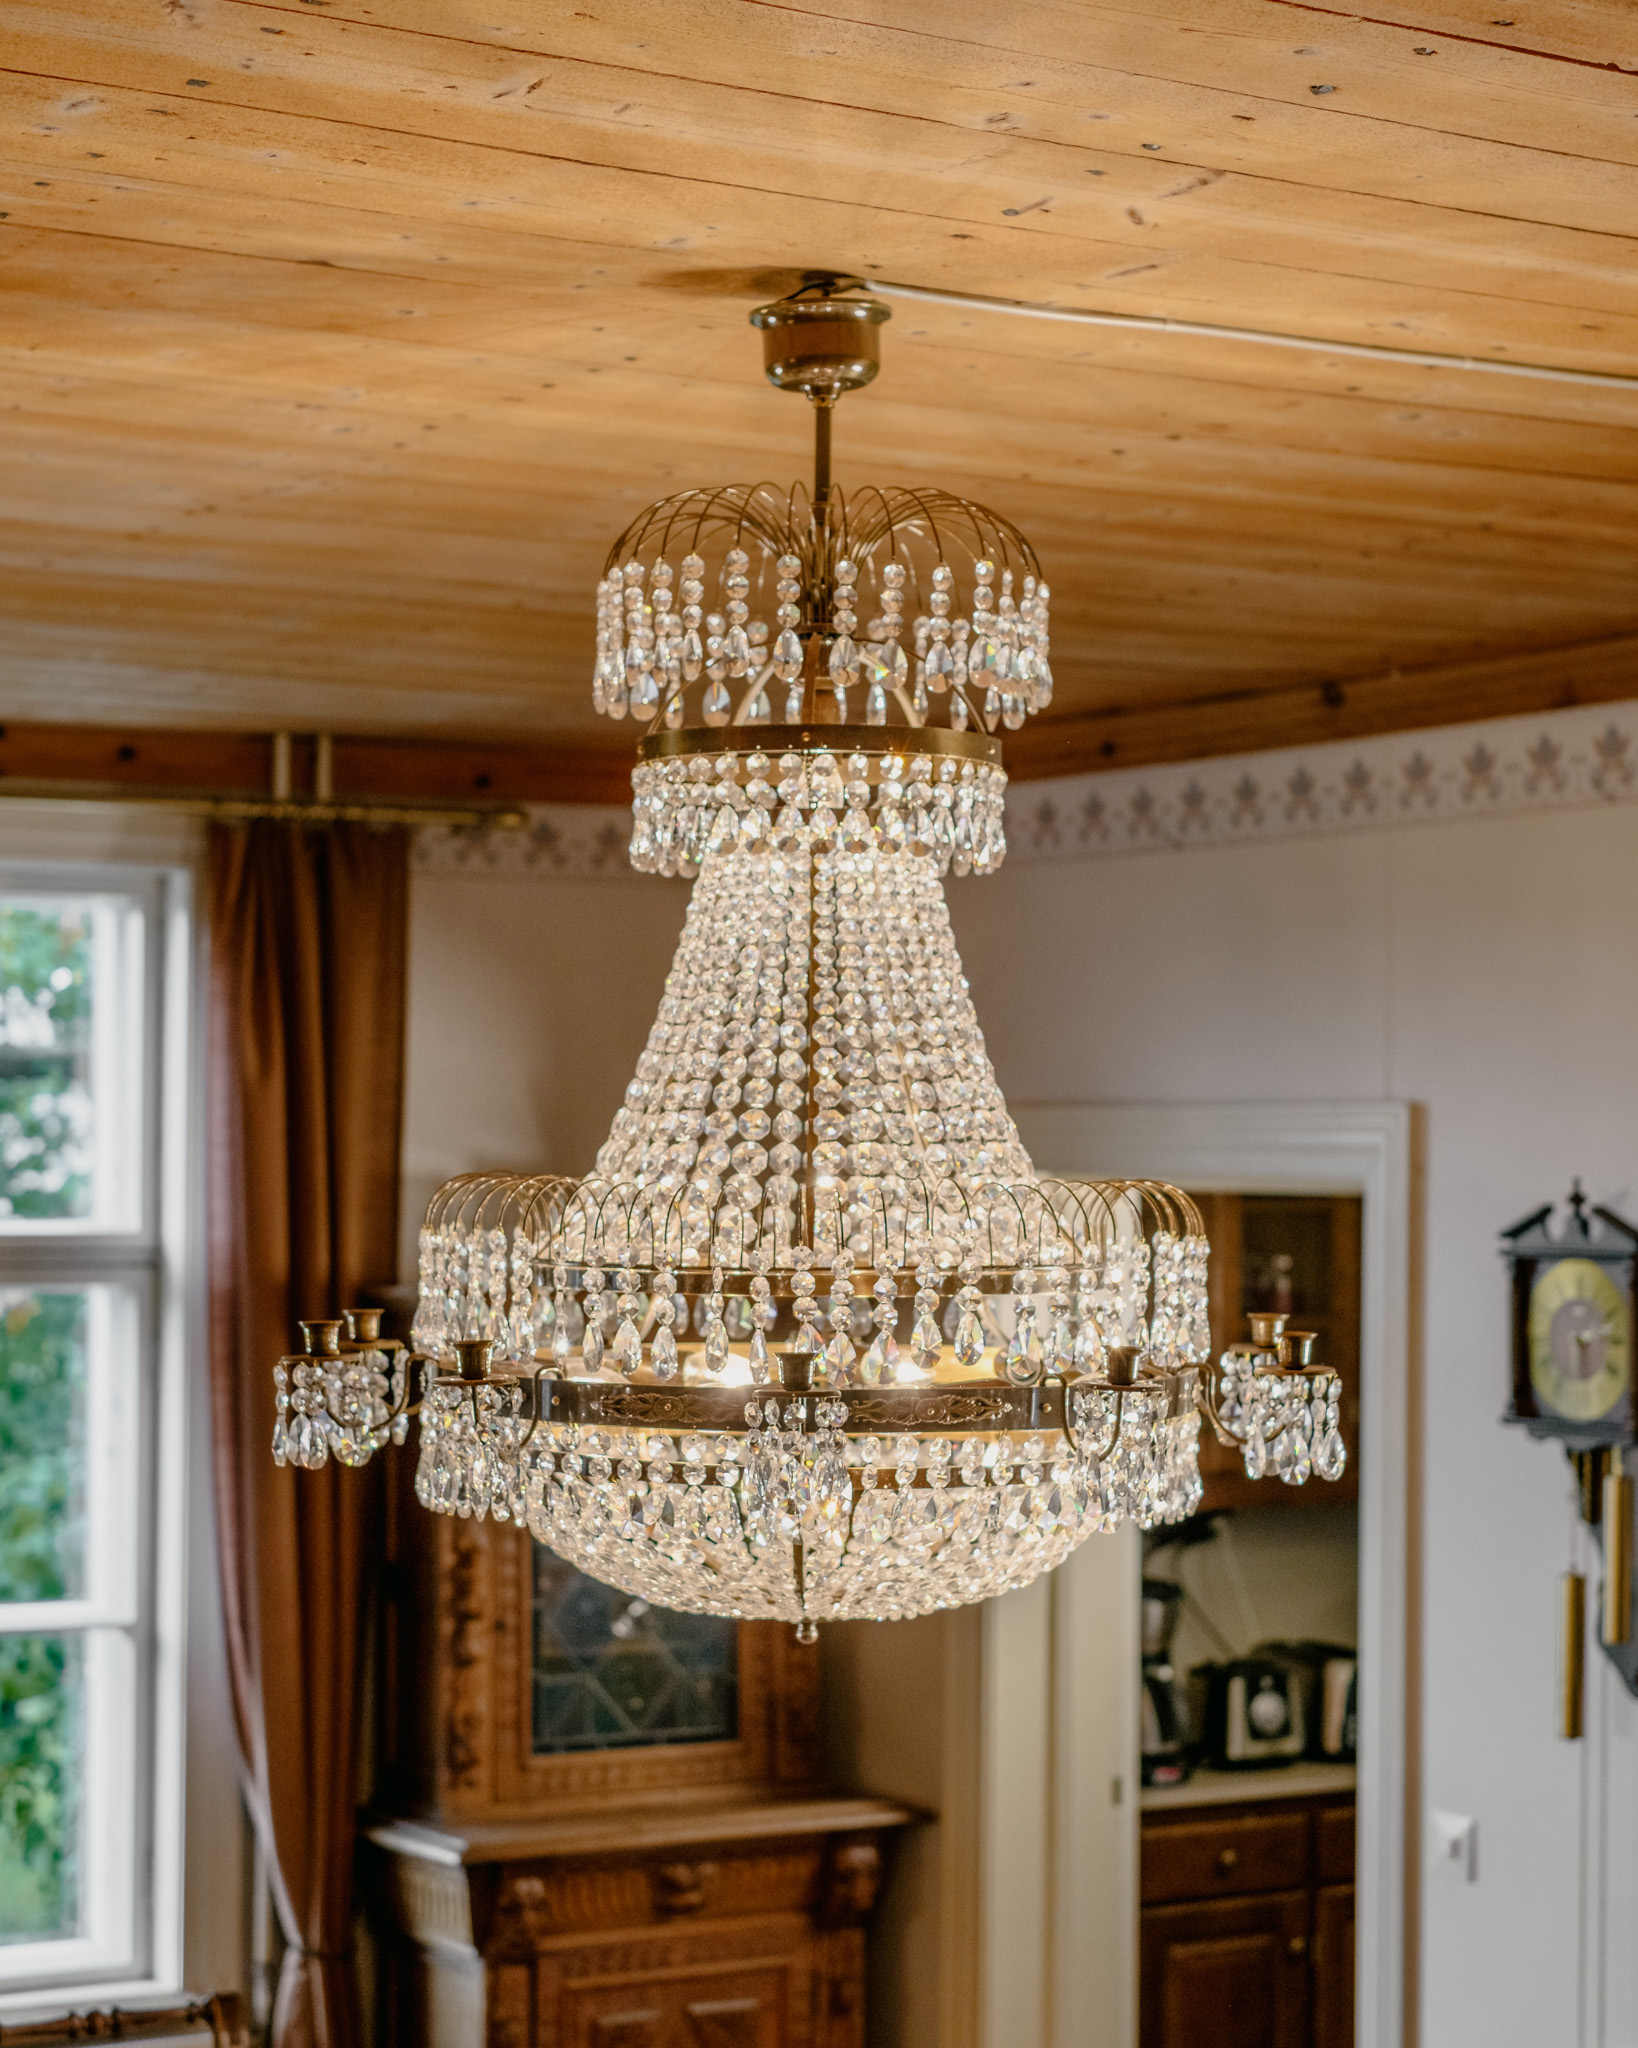 A luxury chandelier with both electric lights and candle placements. A crystal chandelier with an elegant look.